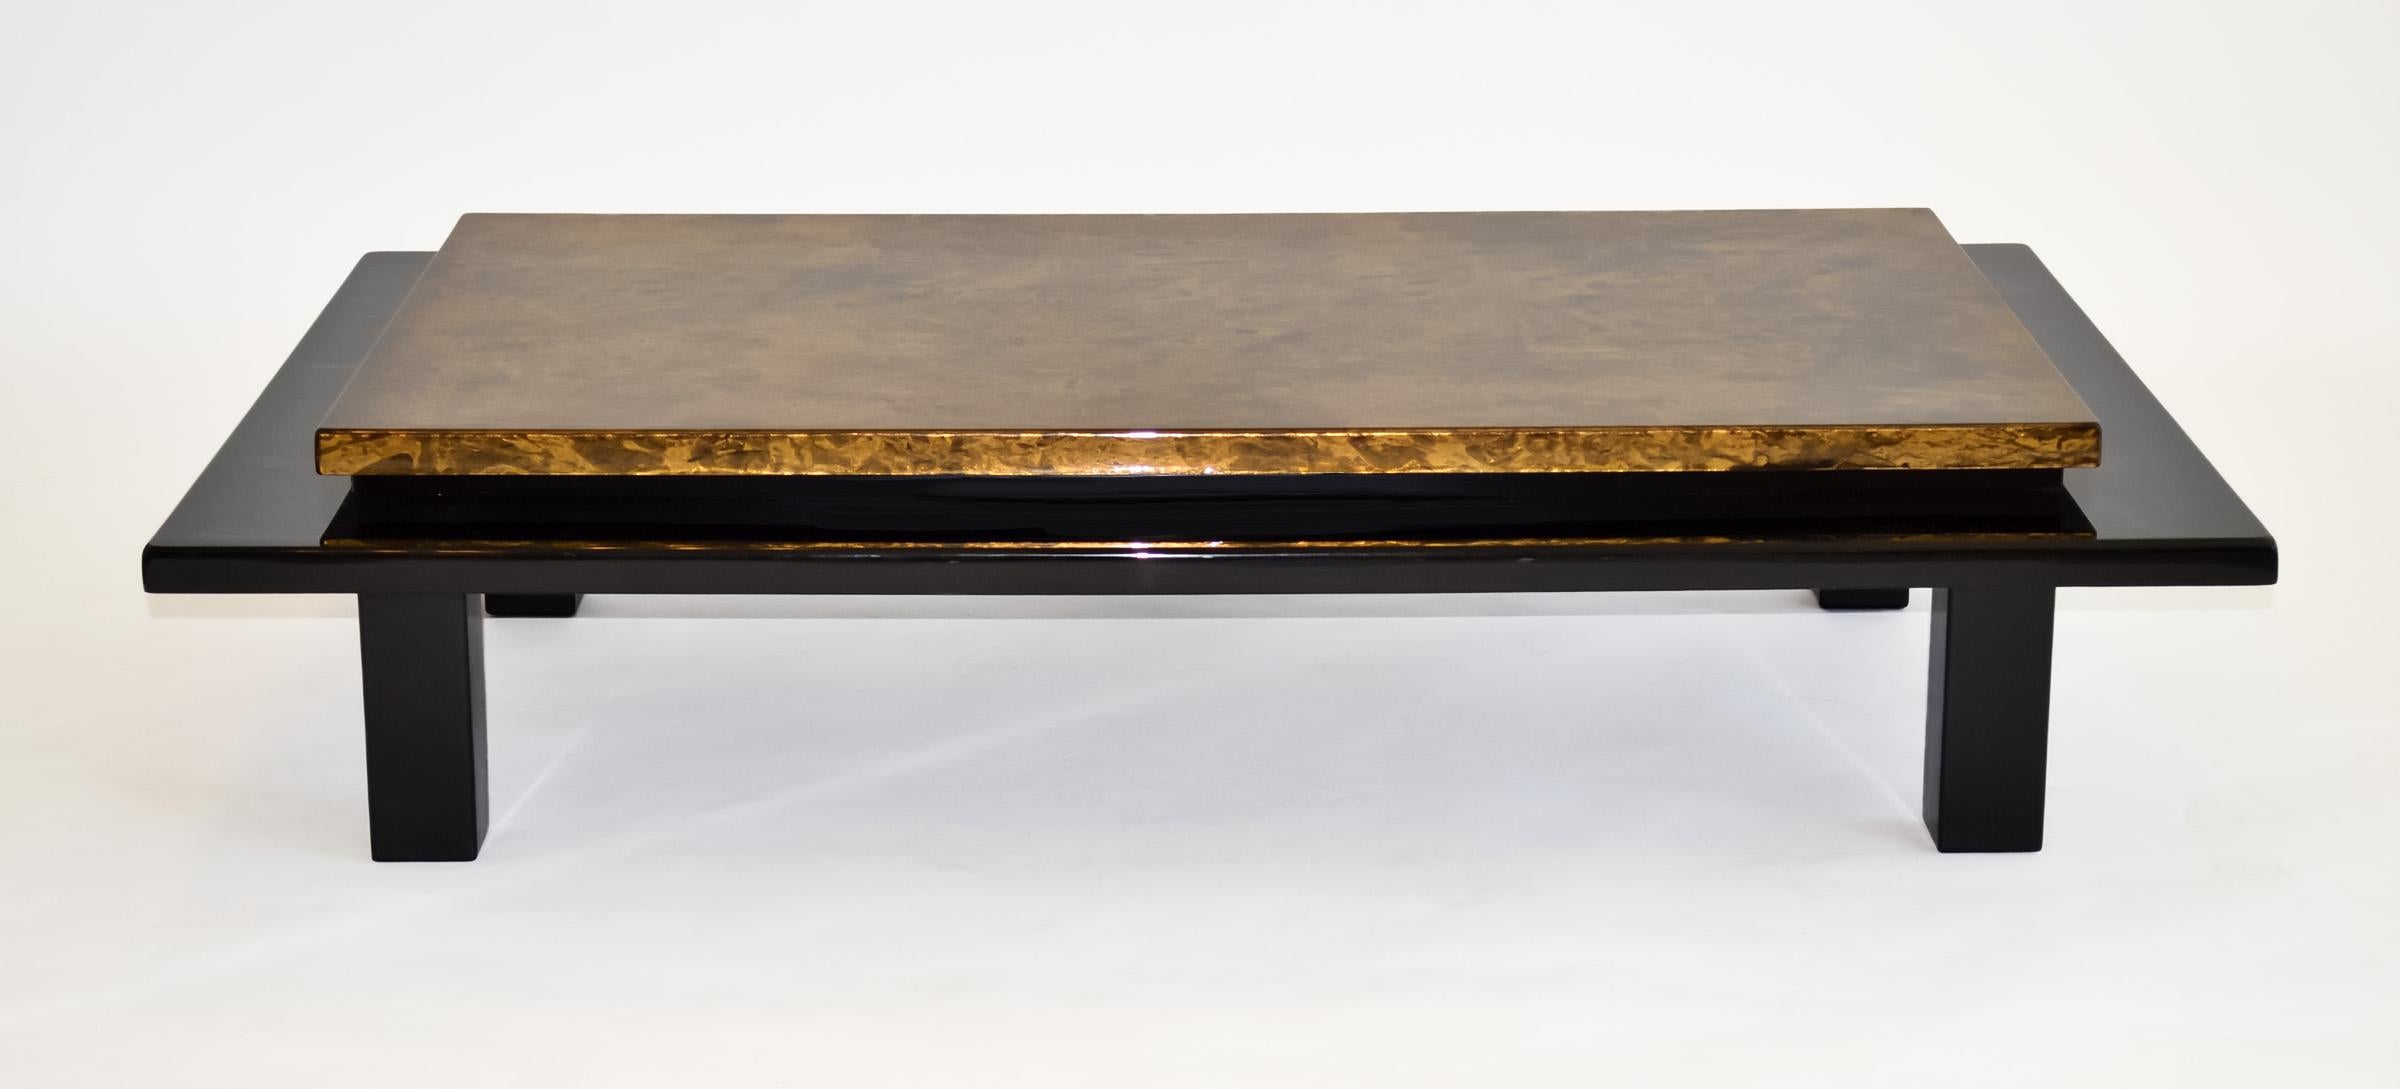 Decorator Black Lacquered Coffee Table Faux Gold Finish Asian James Mont 1980s
Rectangular low cocktail table. Gorgeous mirror-like lacquered black base and columnar legs supports a floating, deep gold faux painted surface. Thick, shiny epoxy